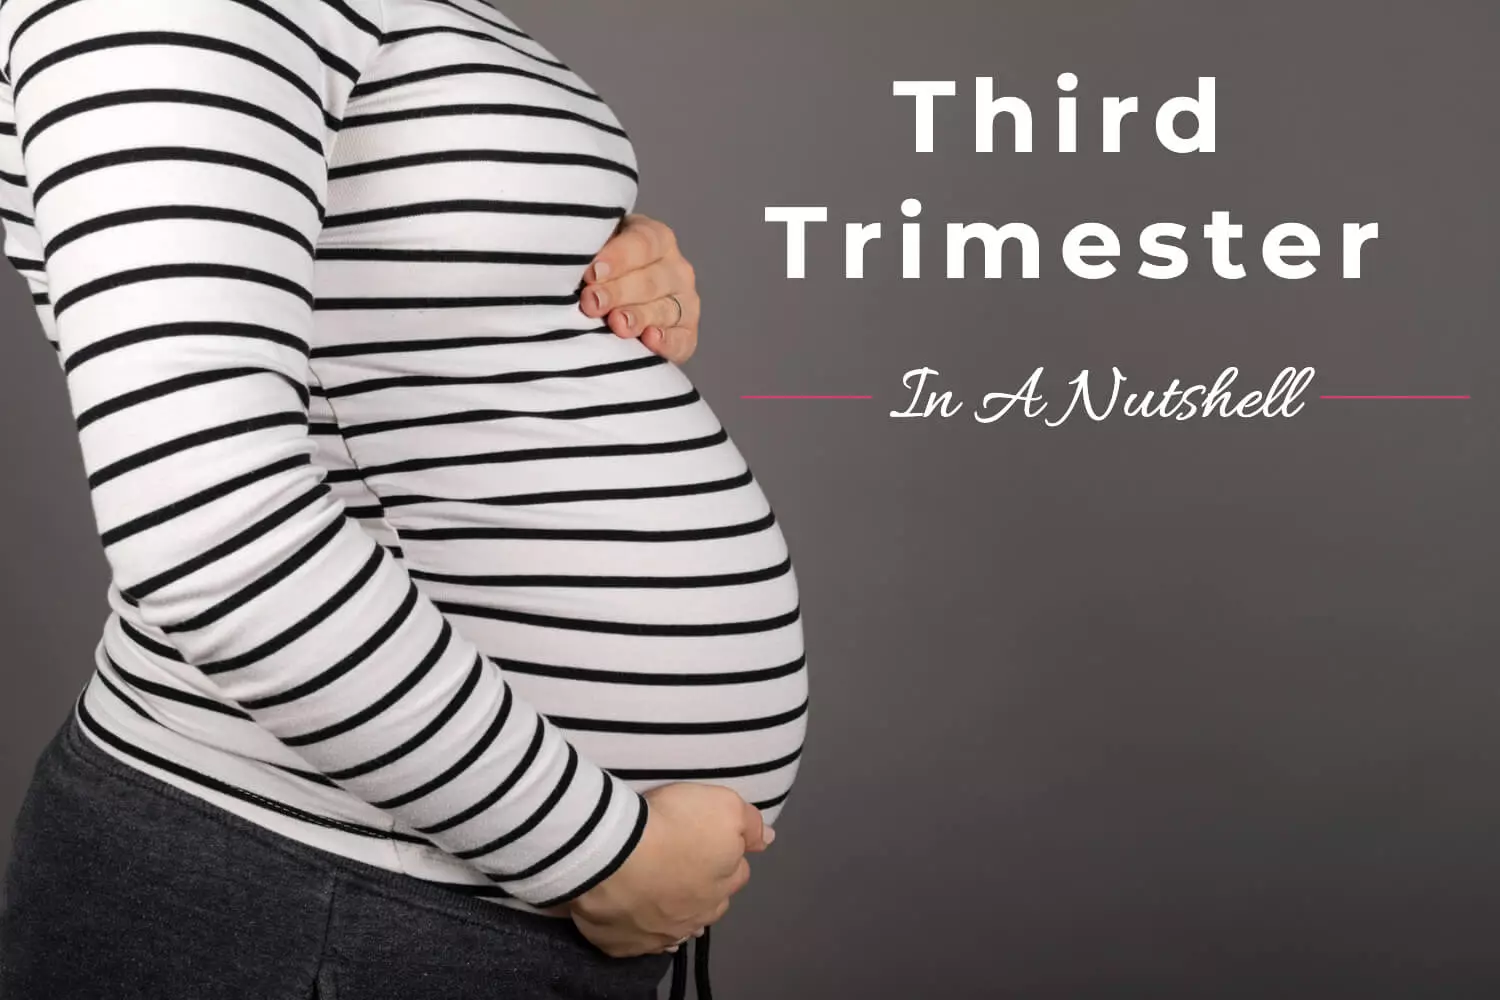 Third Trimester: In A Nutshell